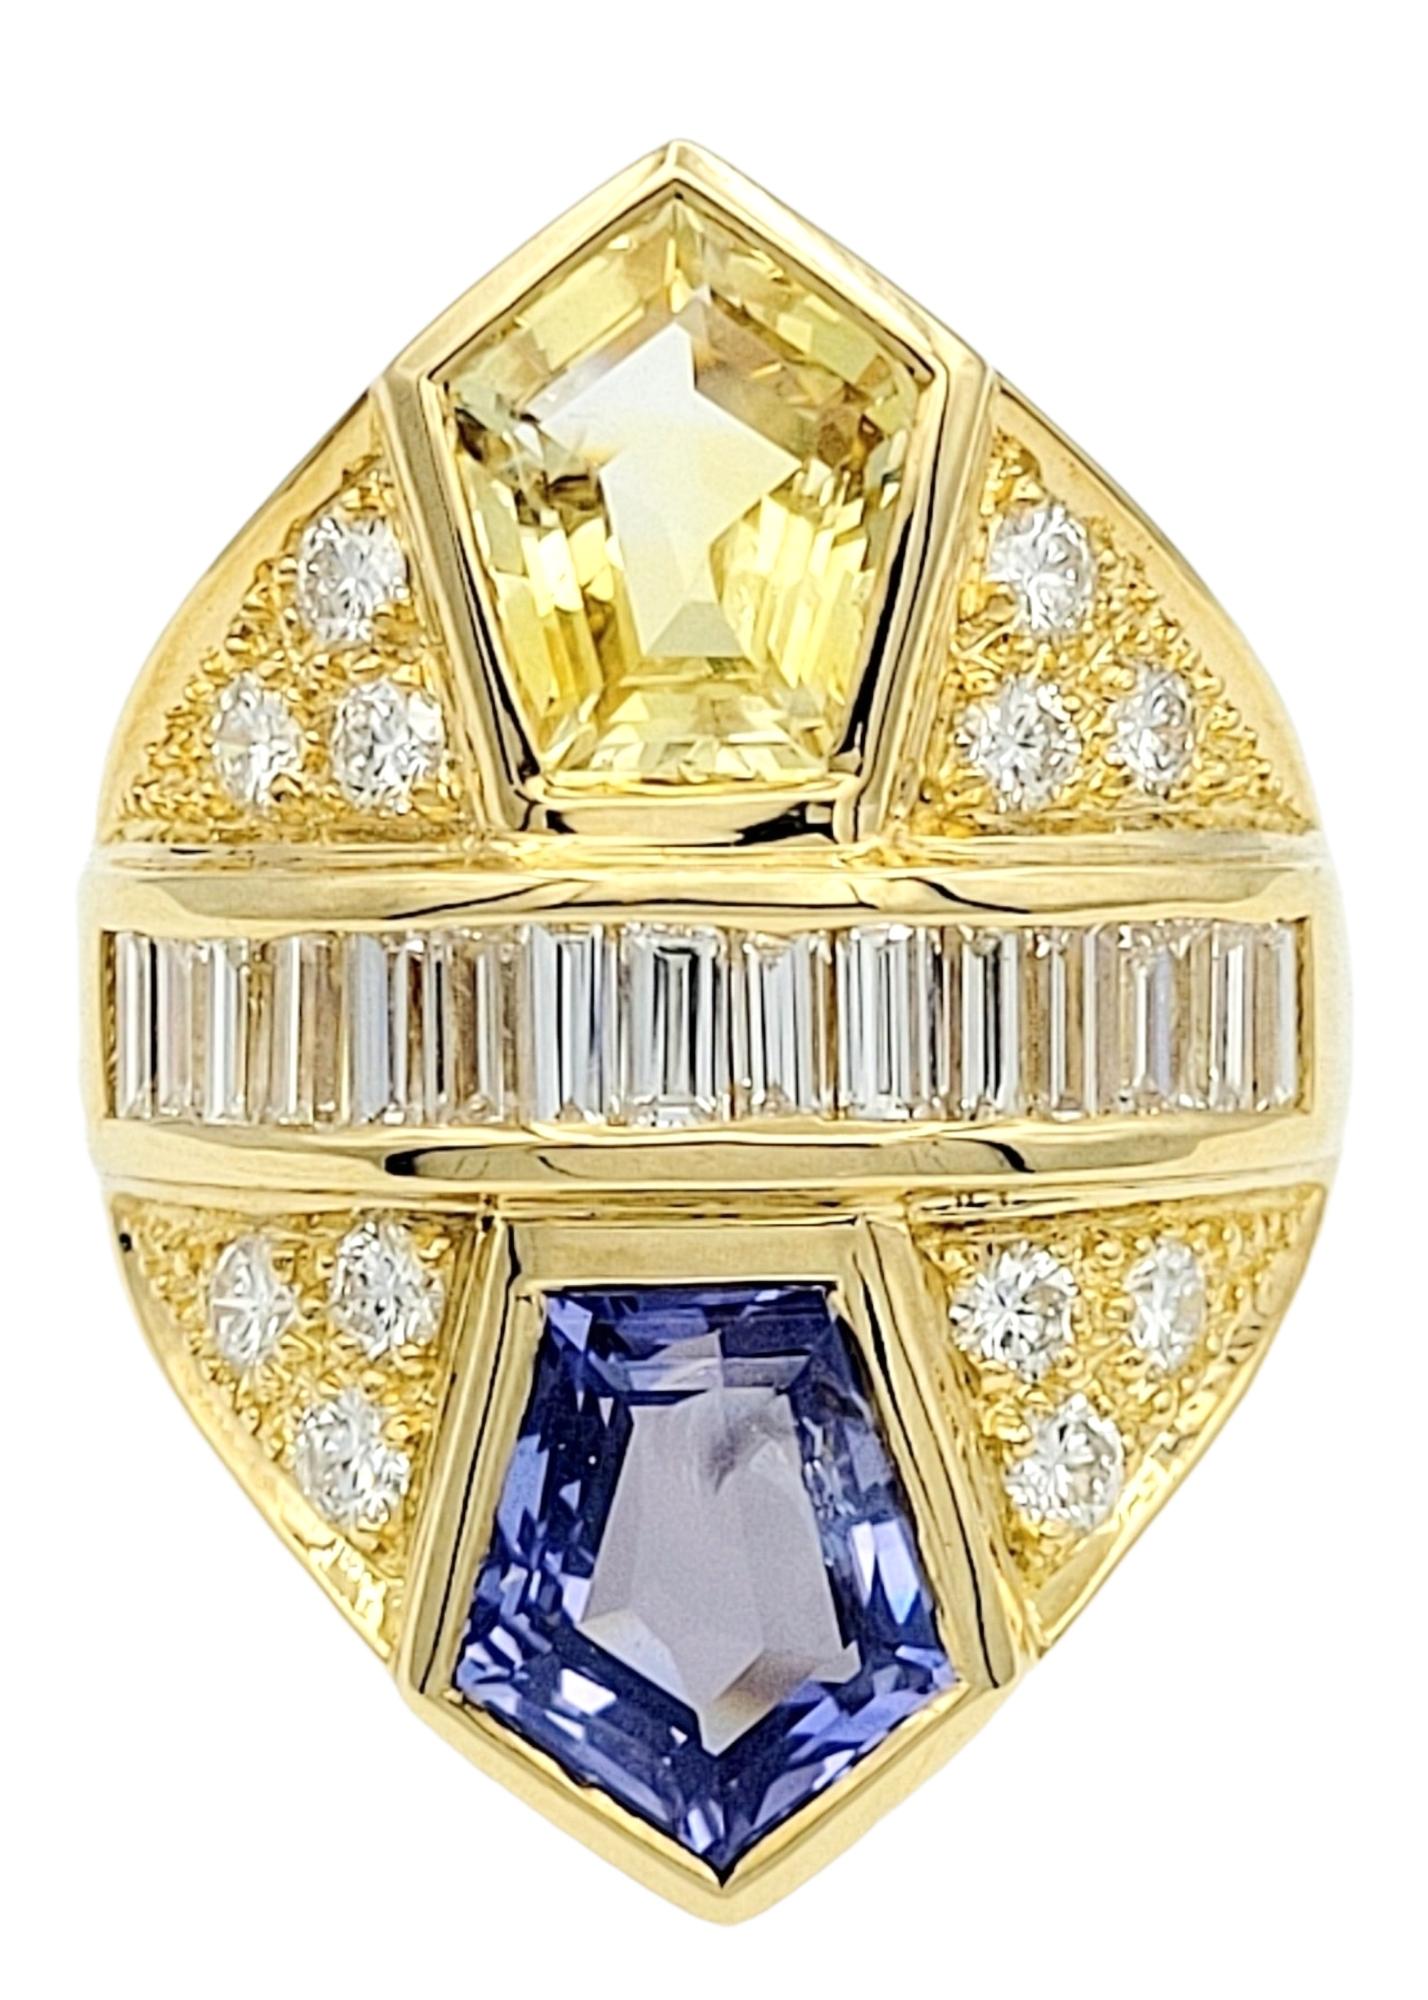 Ring Size: 6.75

An exquisitely designed cocktail ring of unparalleled beauty! This remarkable piece showcases the brilliance of natural sapphires and diamonds set in 18-karat yellow gold.

The centerpiece features two large pentagon-cut natural